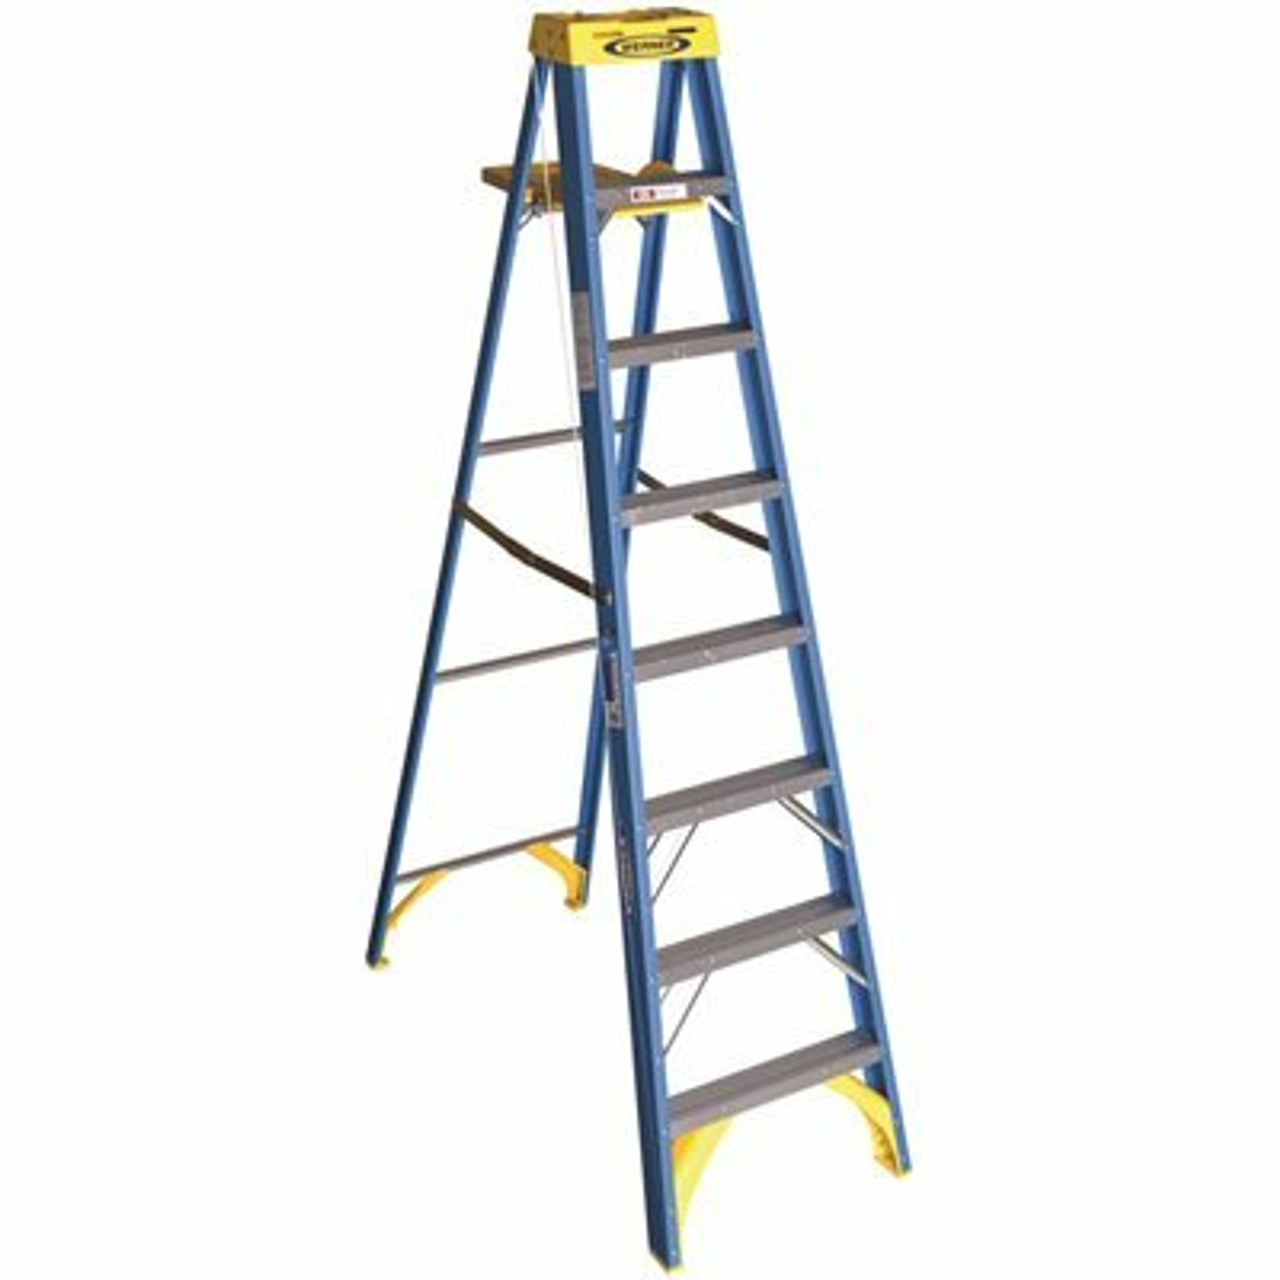 Werner 8 Ft. Fiberglass Step Ladder With 250 Lbs. Load Capacity Type I Duty Rating